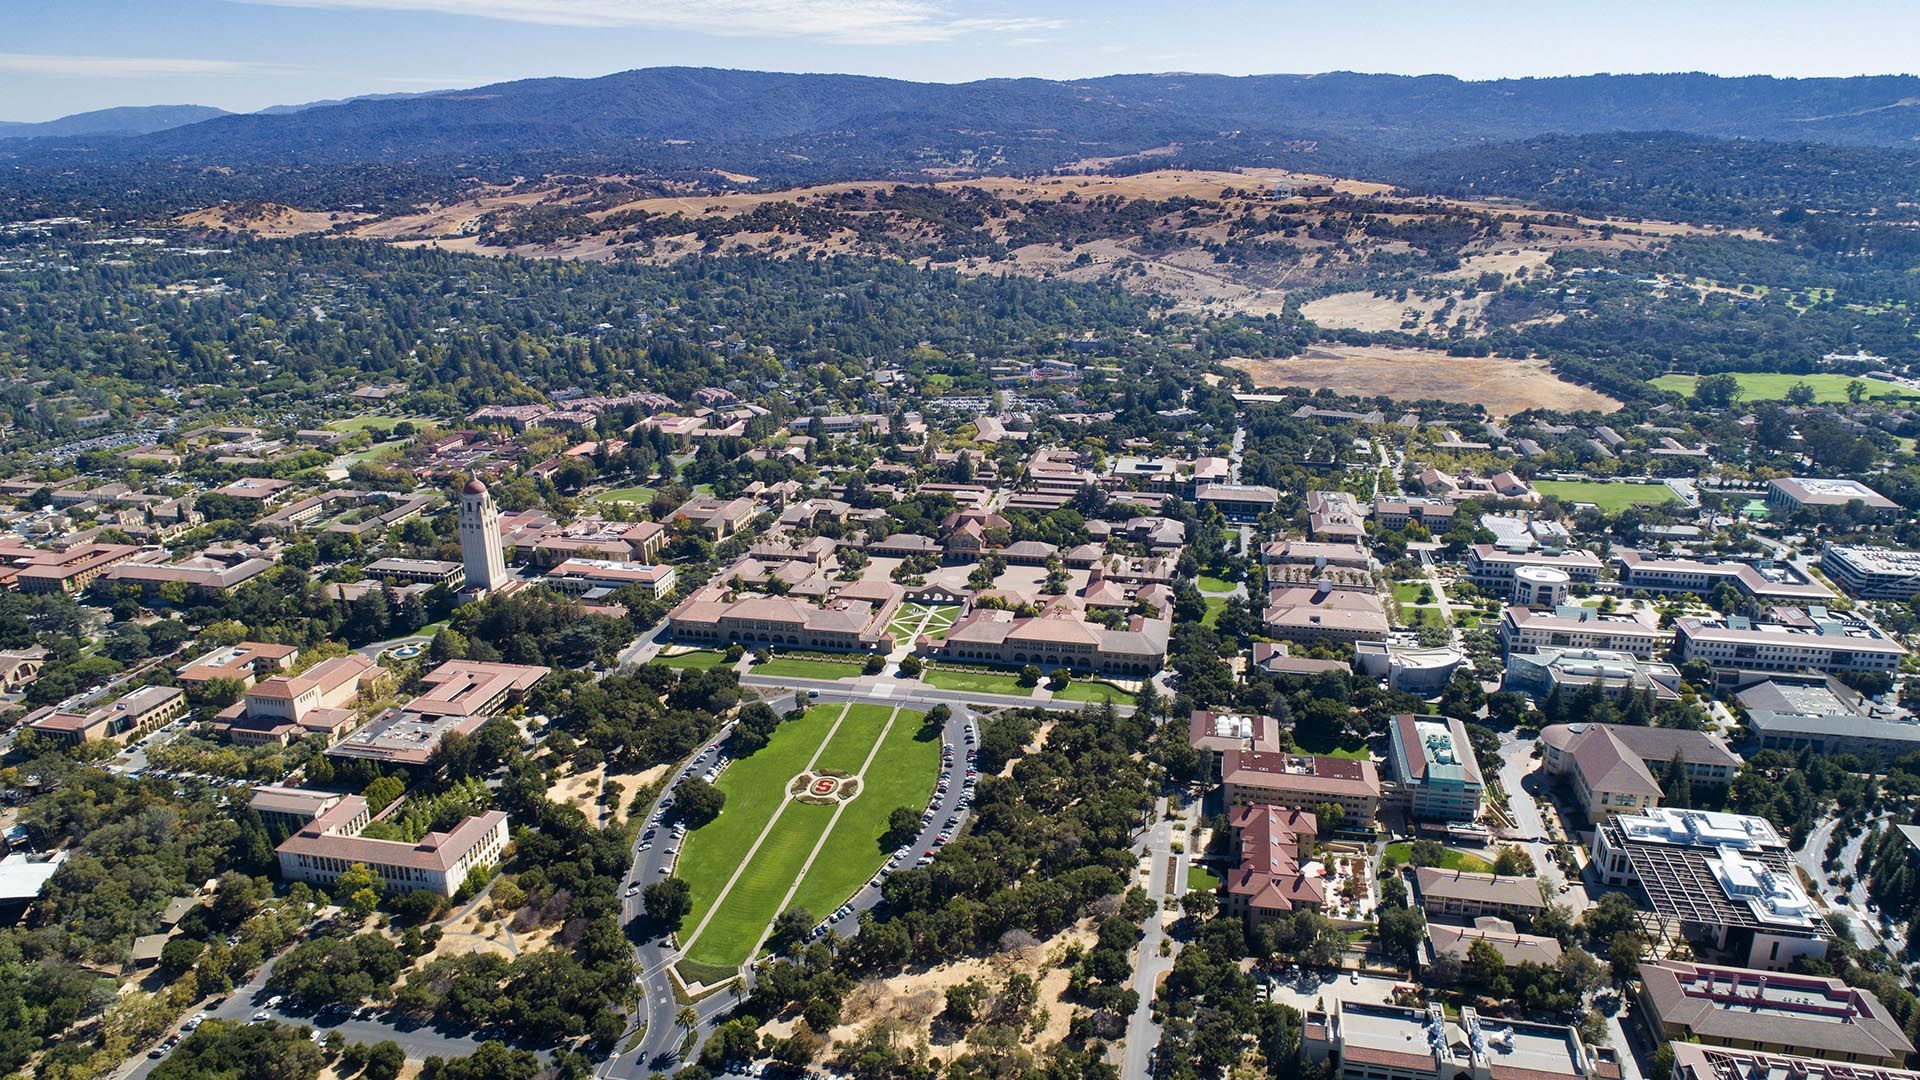 Stanford University Campus Planning and Projects